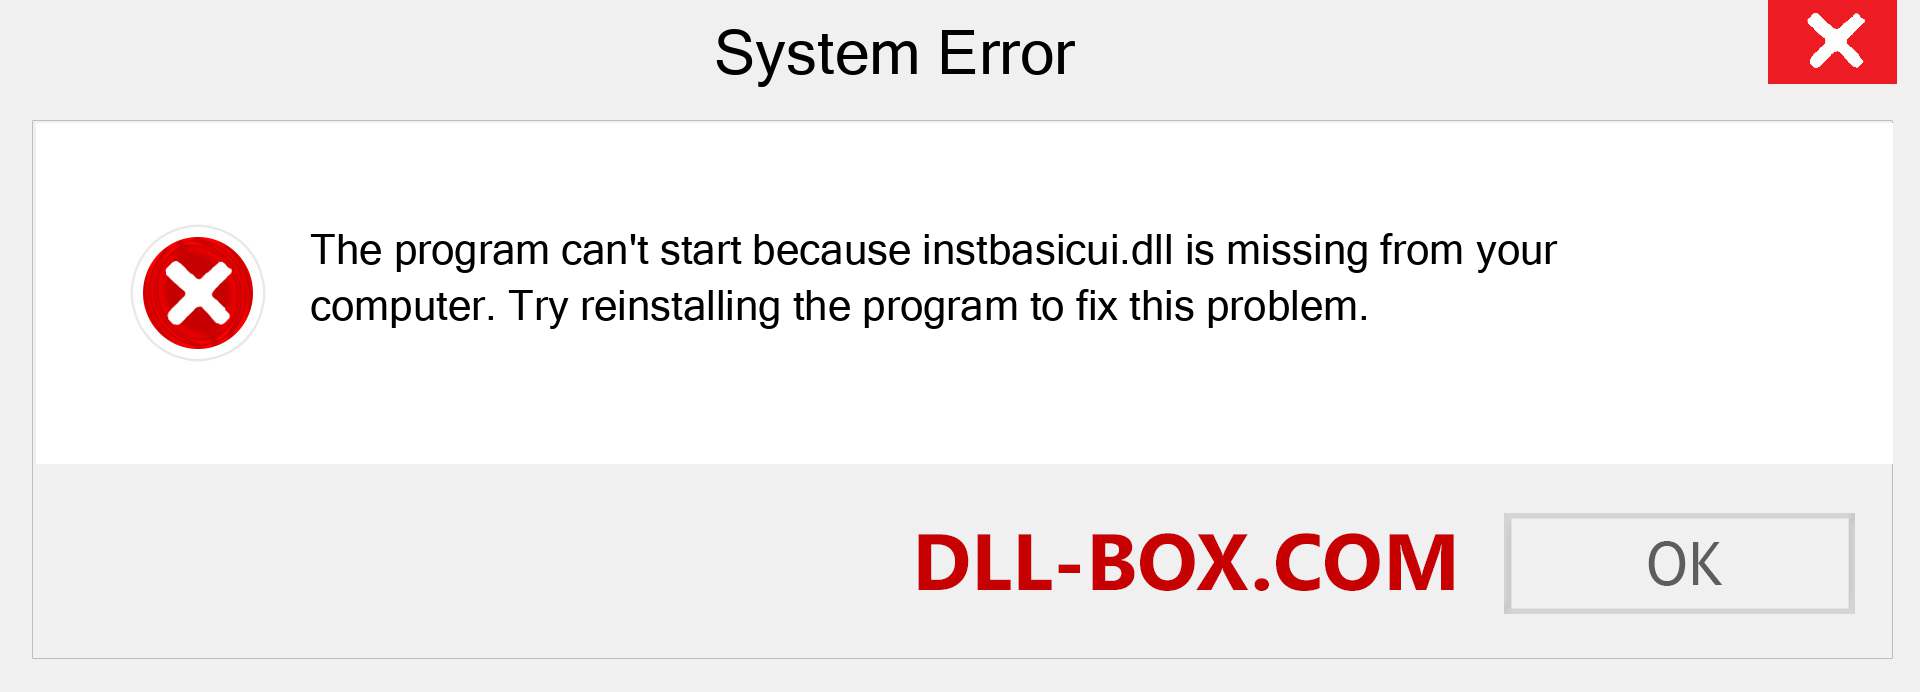  instbasicui.dll file is missing?. Download for Windows 7, 8, 10 - Fix  instbasicui dll Missing Error on Windows, photos, images